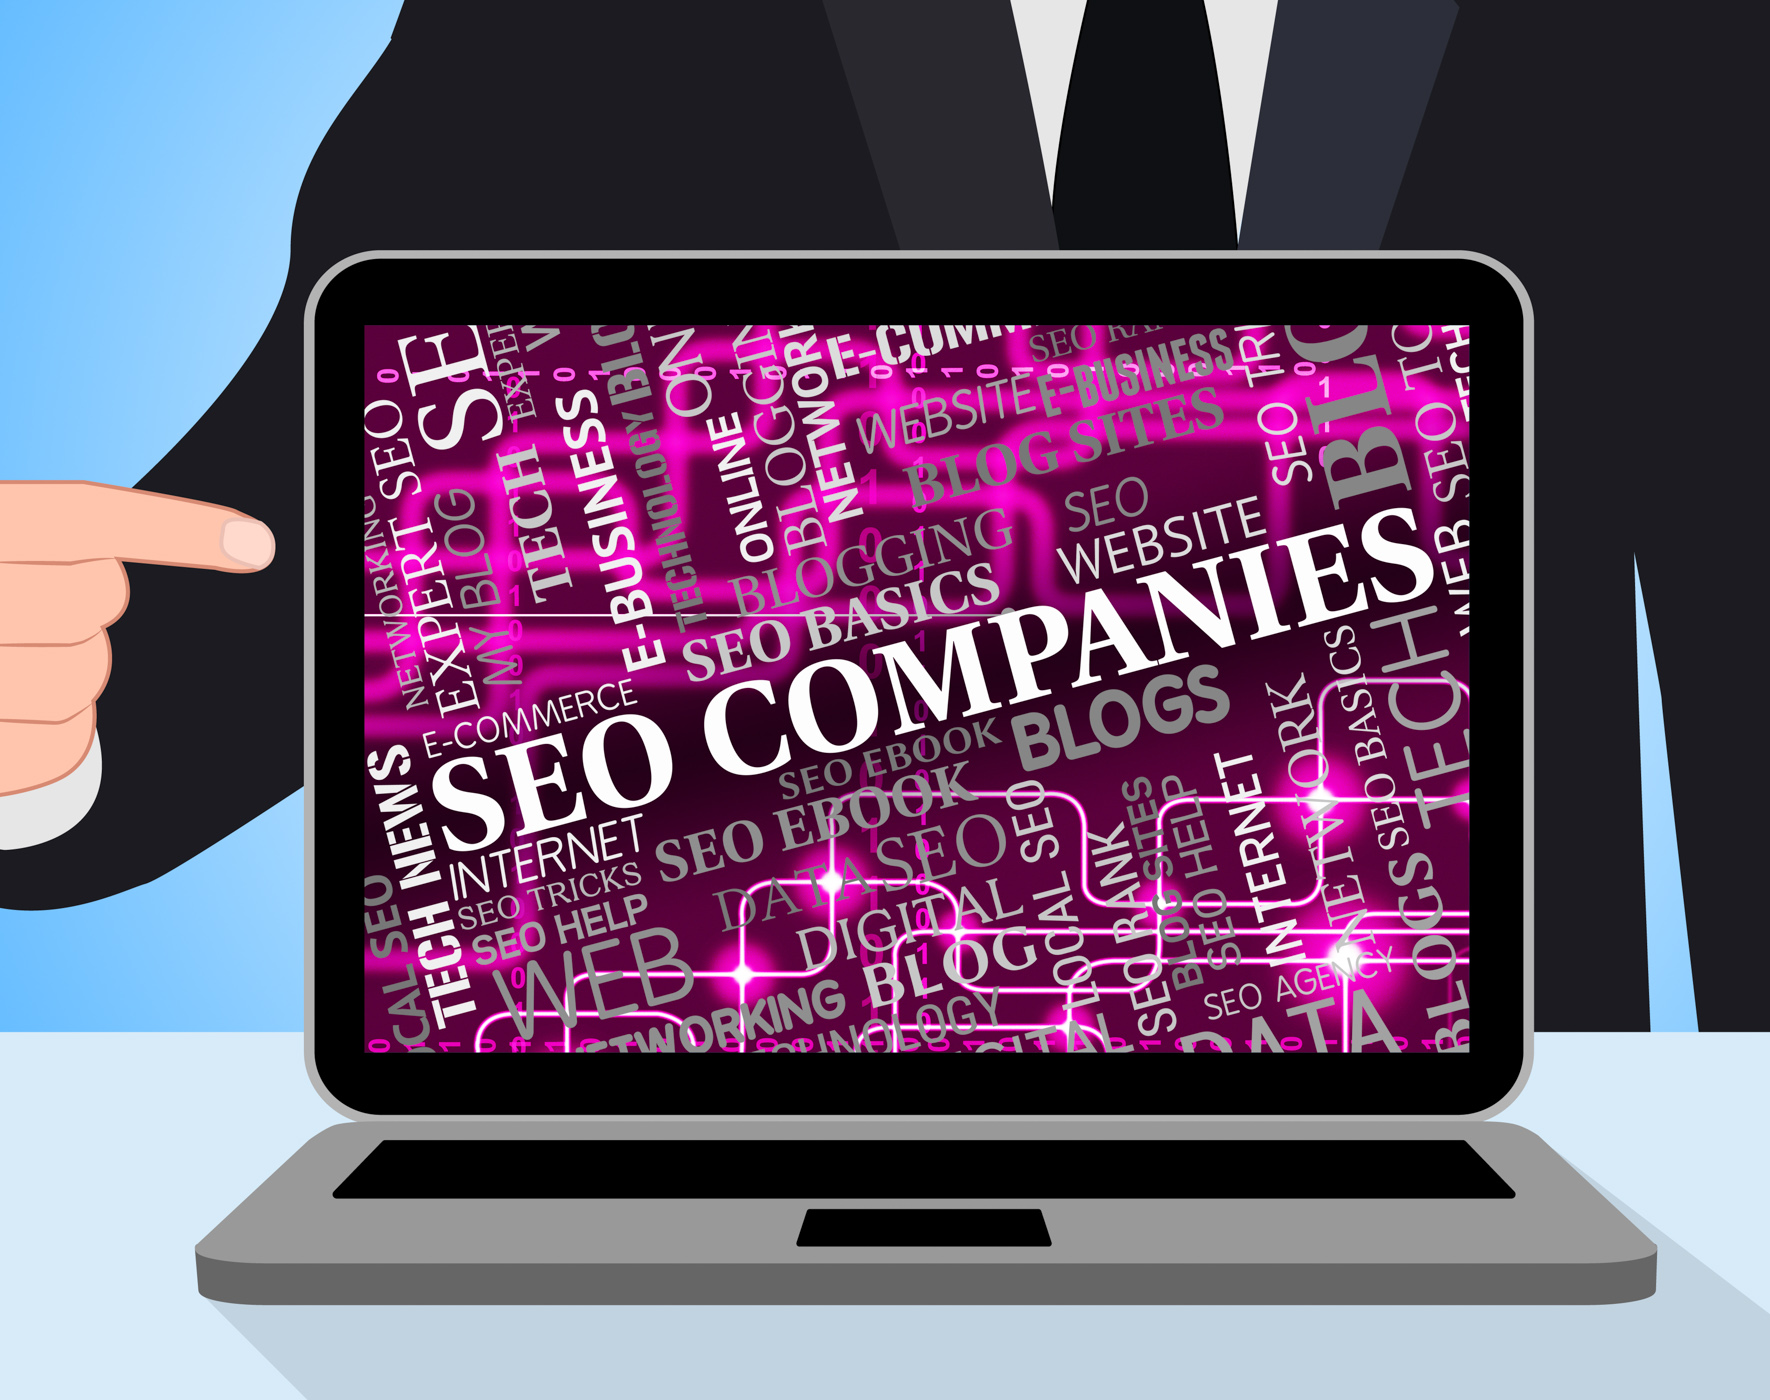 Seo companies represents search engine and businesses photo